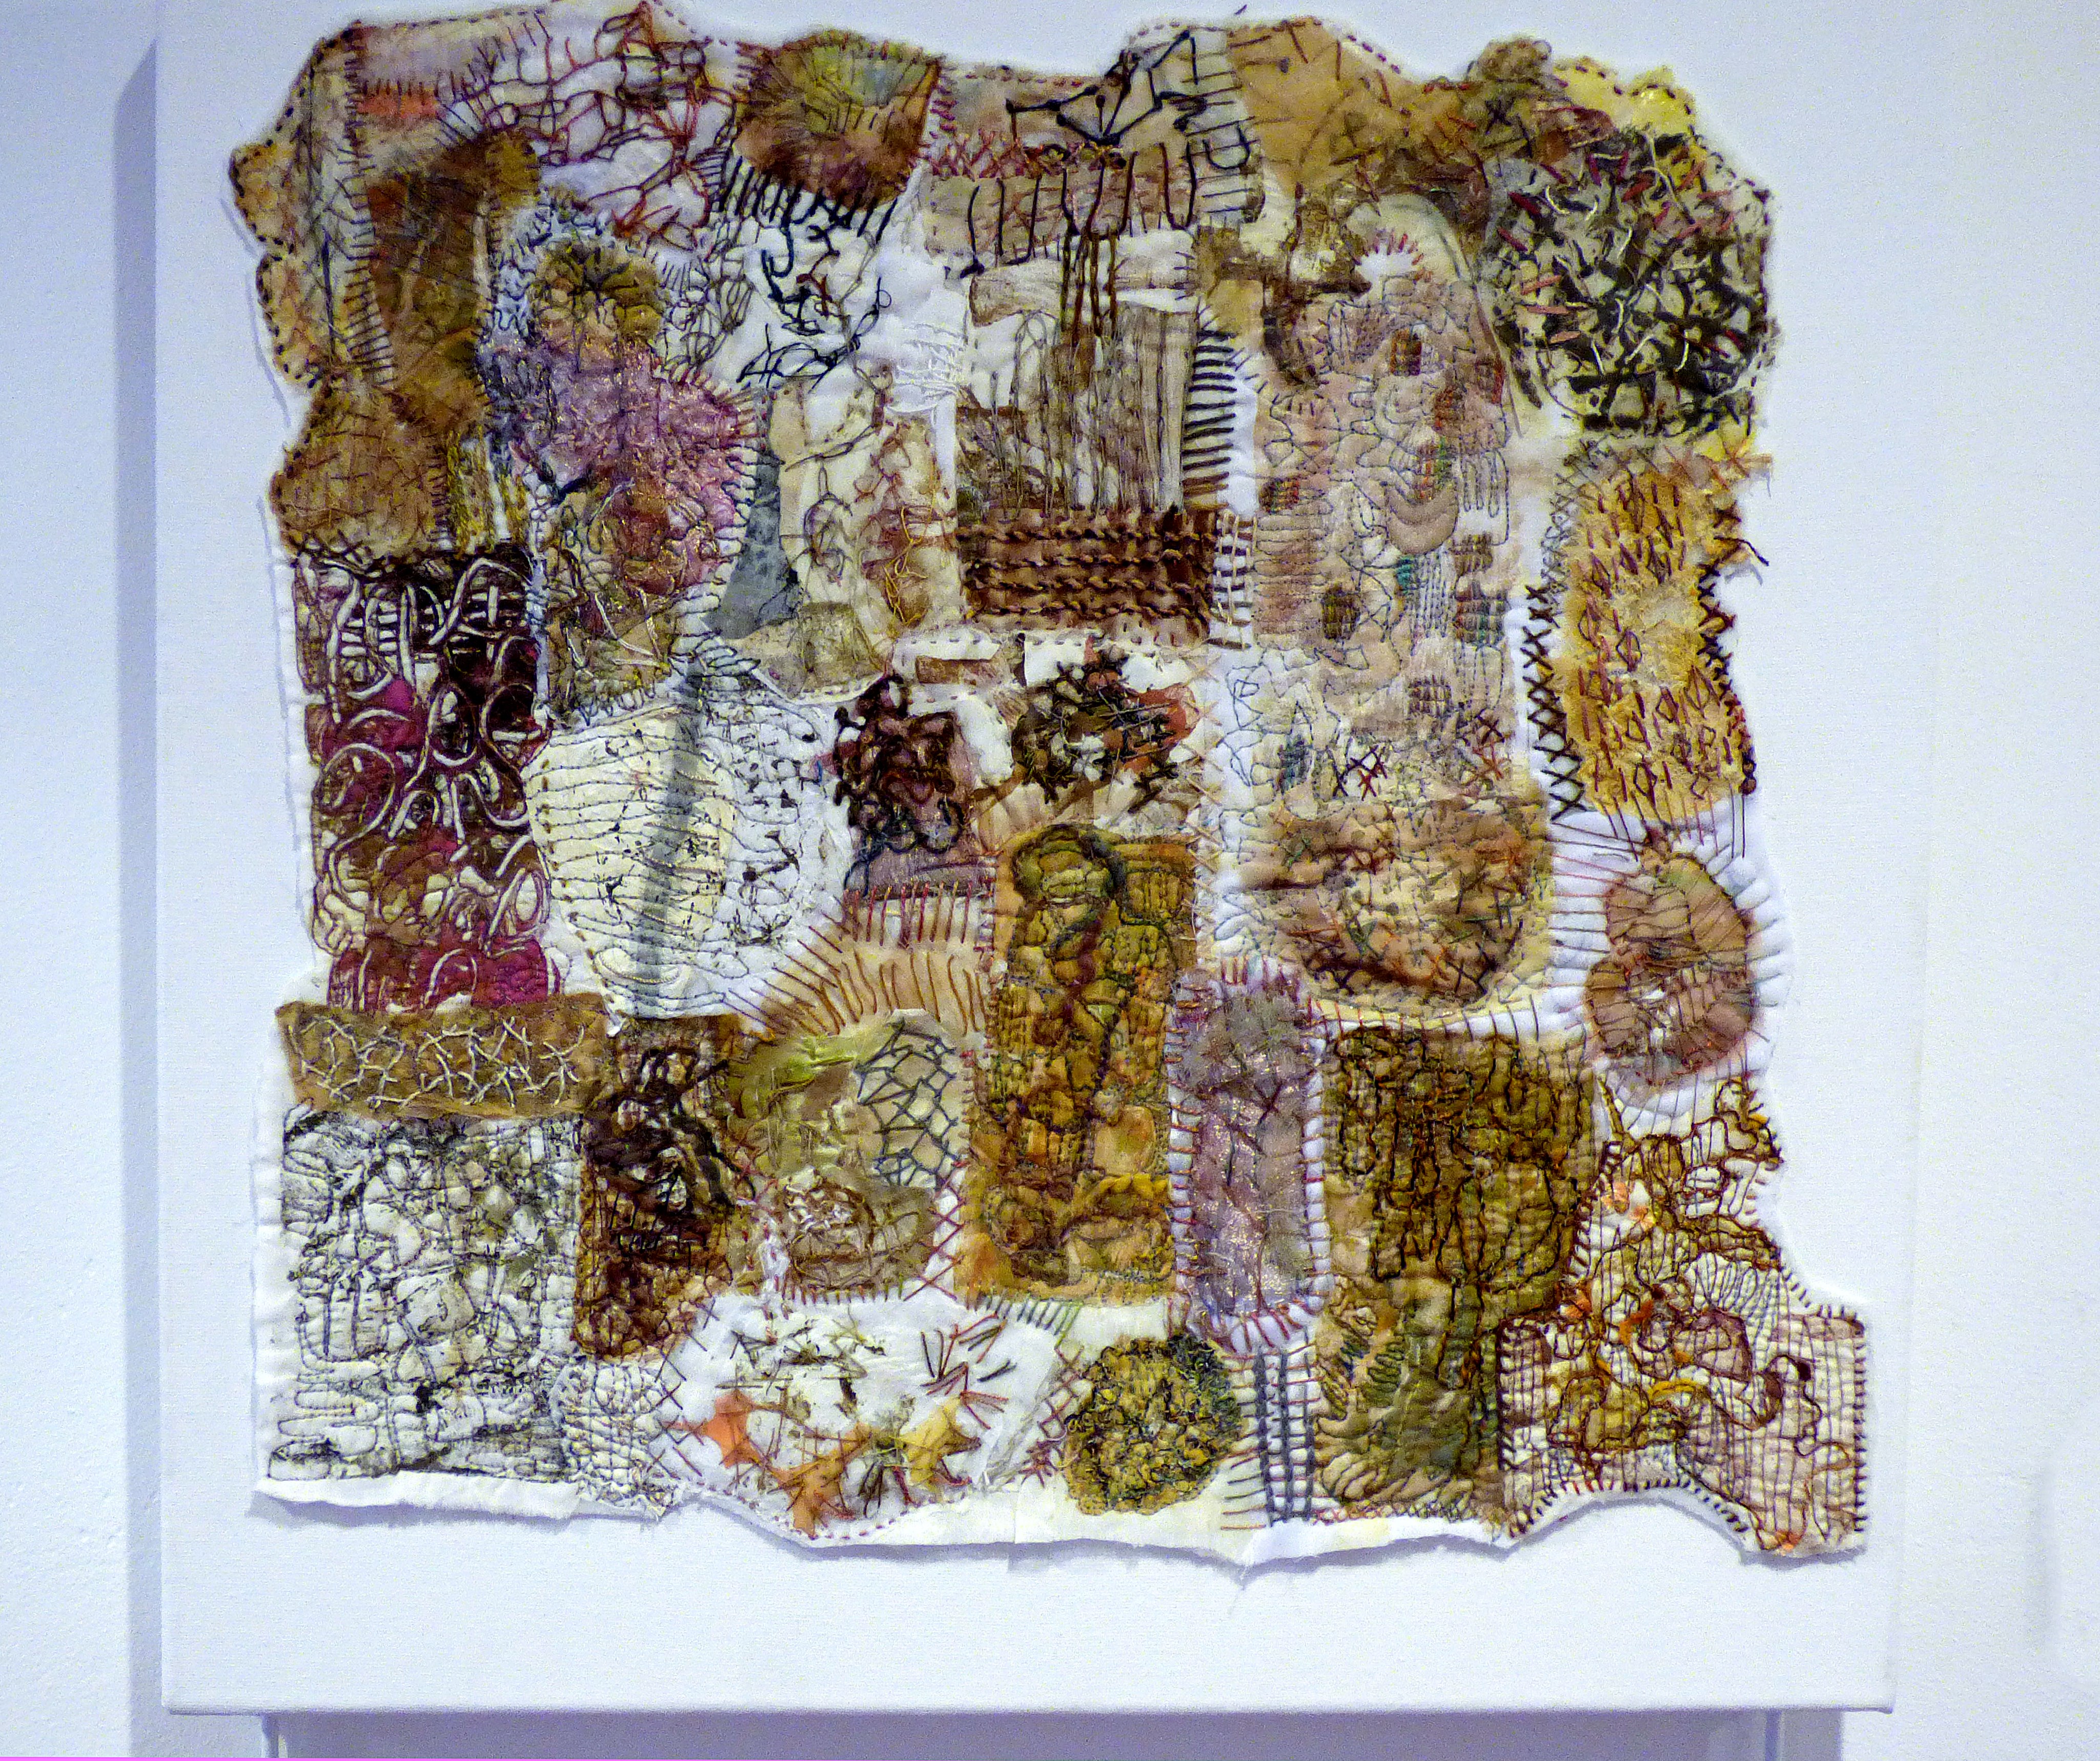 LACING AND LINKAGES by Lesley Karen Tingle, Textile Art Group exhibition, Leeds, 2016